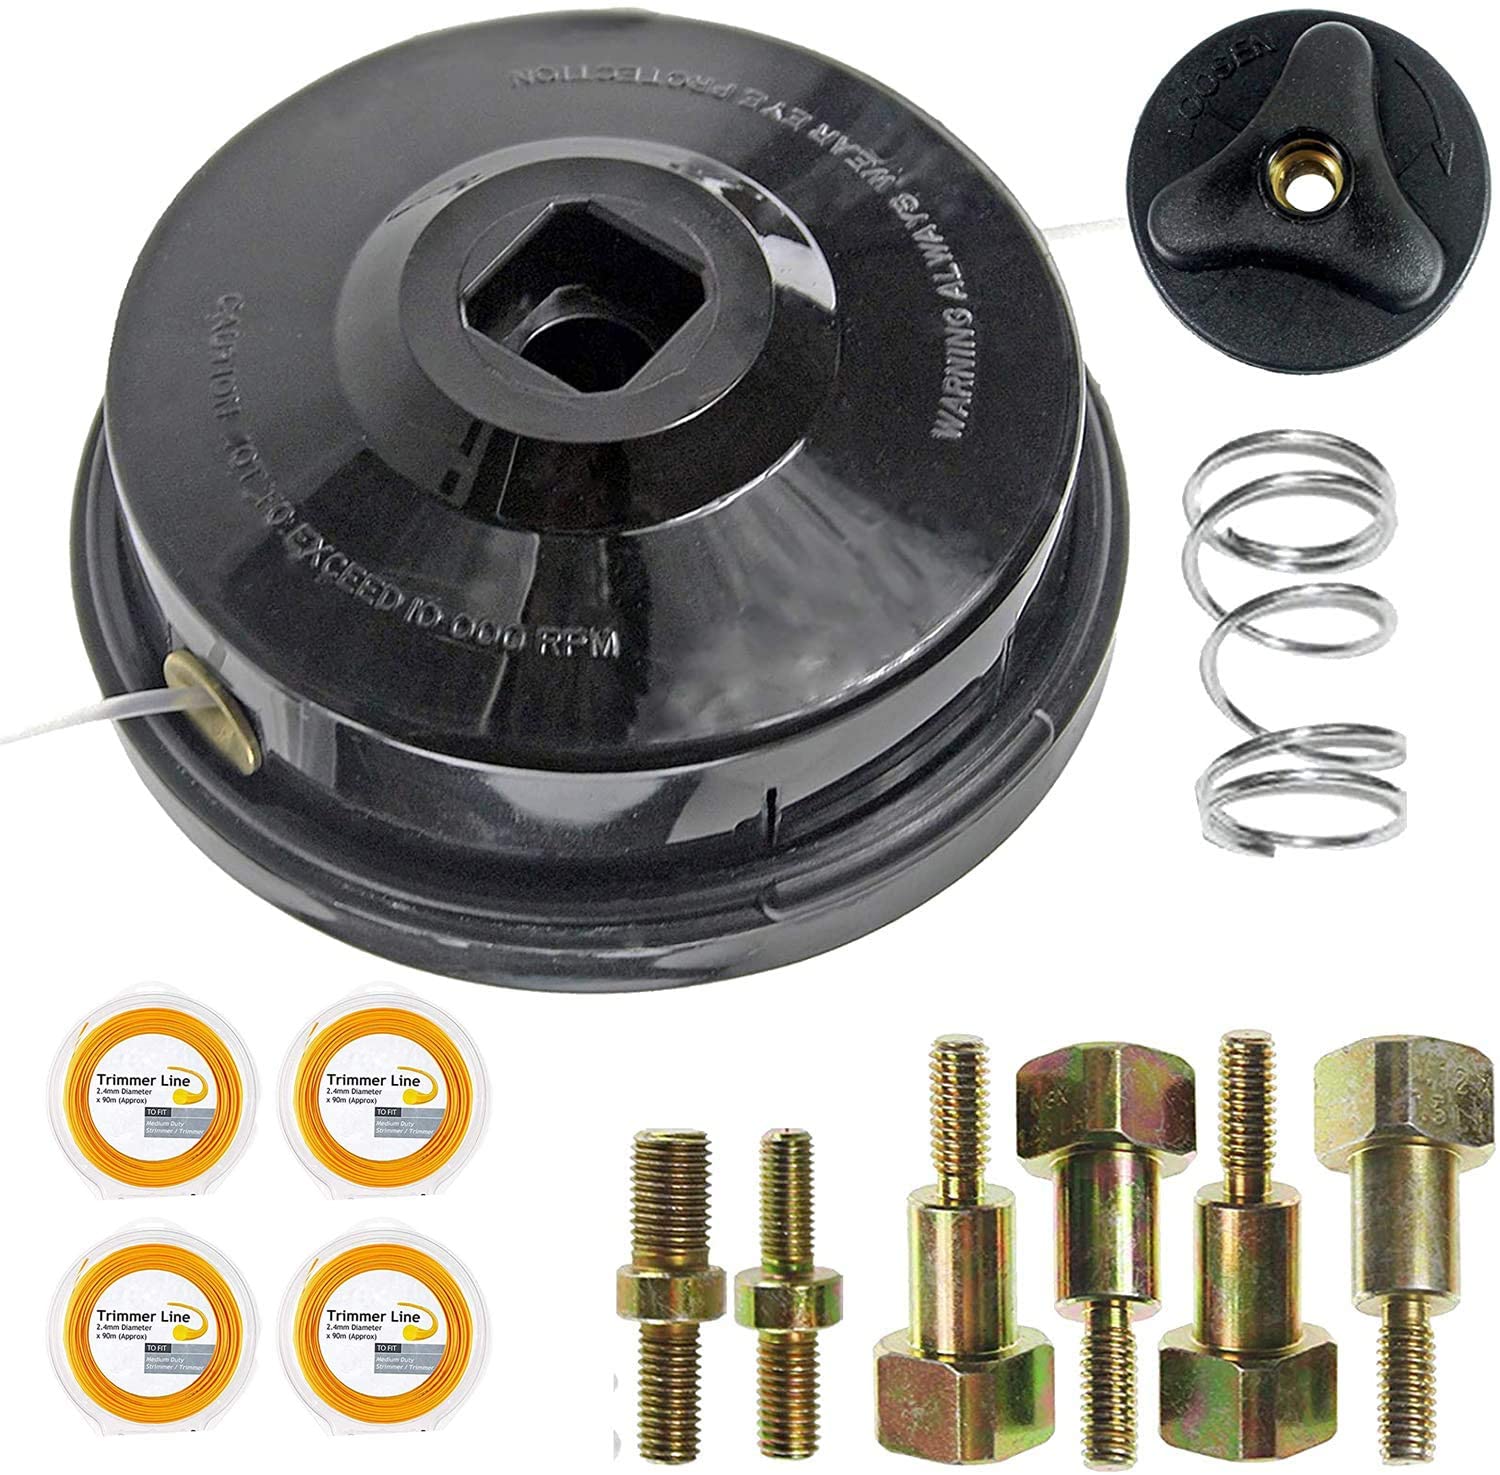 UNIVERSAL Dual Line Manual Feed Head with Bolts + 4 x 90m Refill for Strimmer/Trimmer/Brushcutter